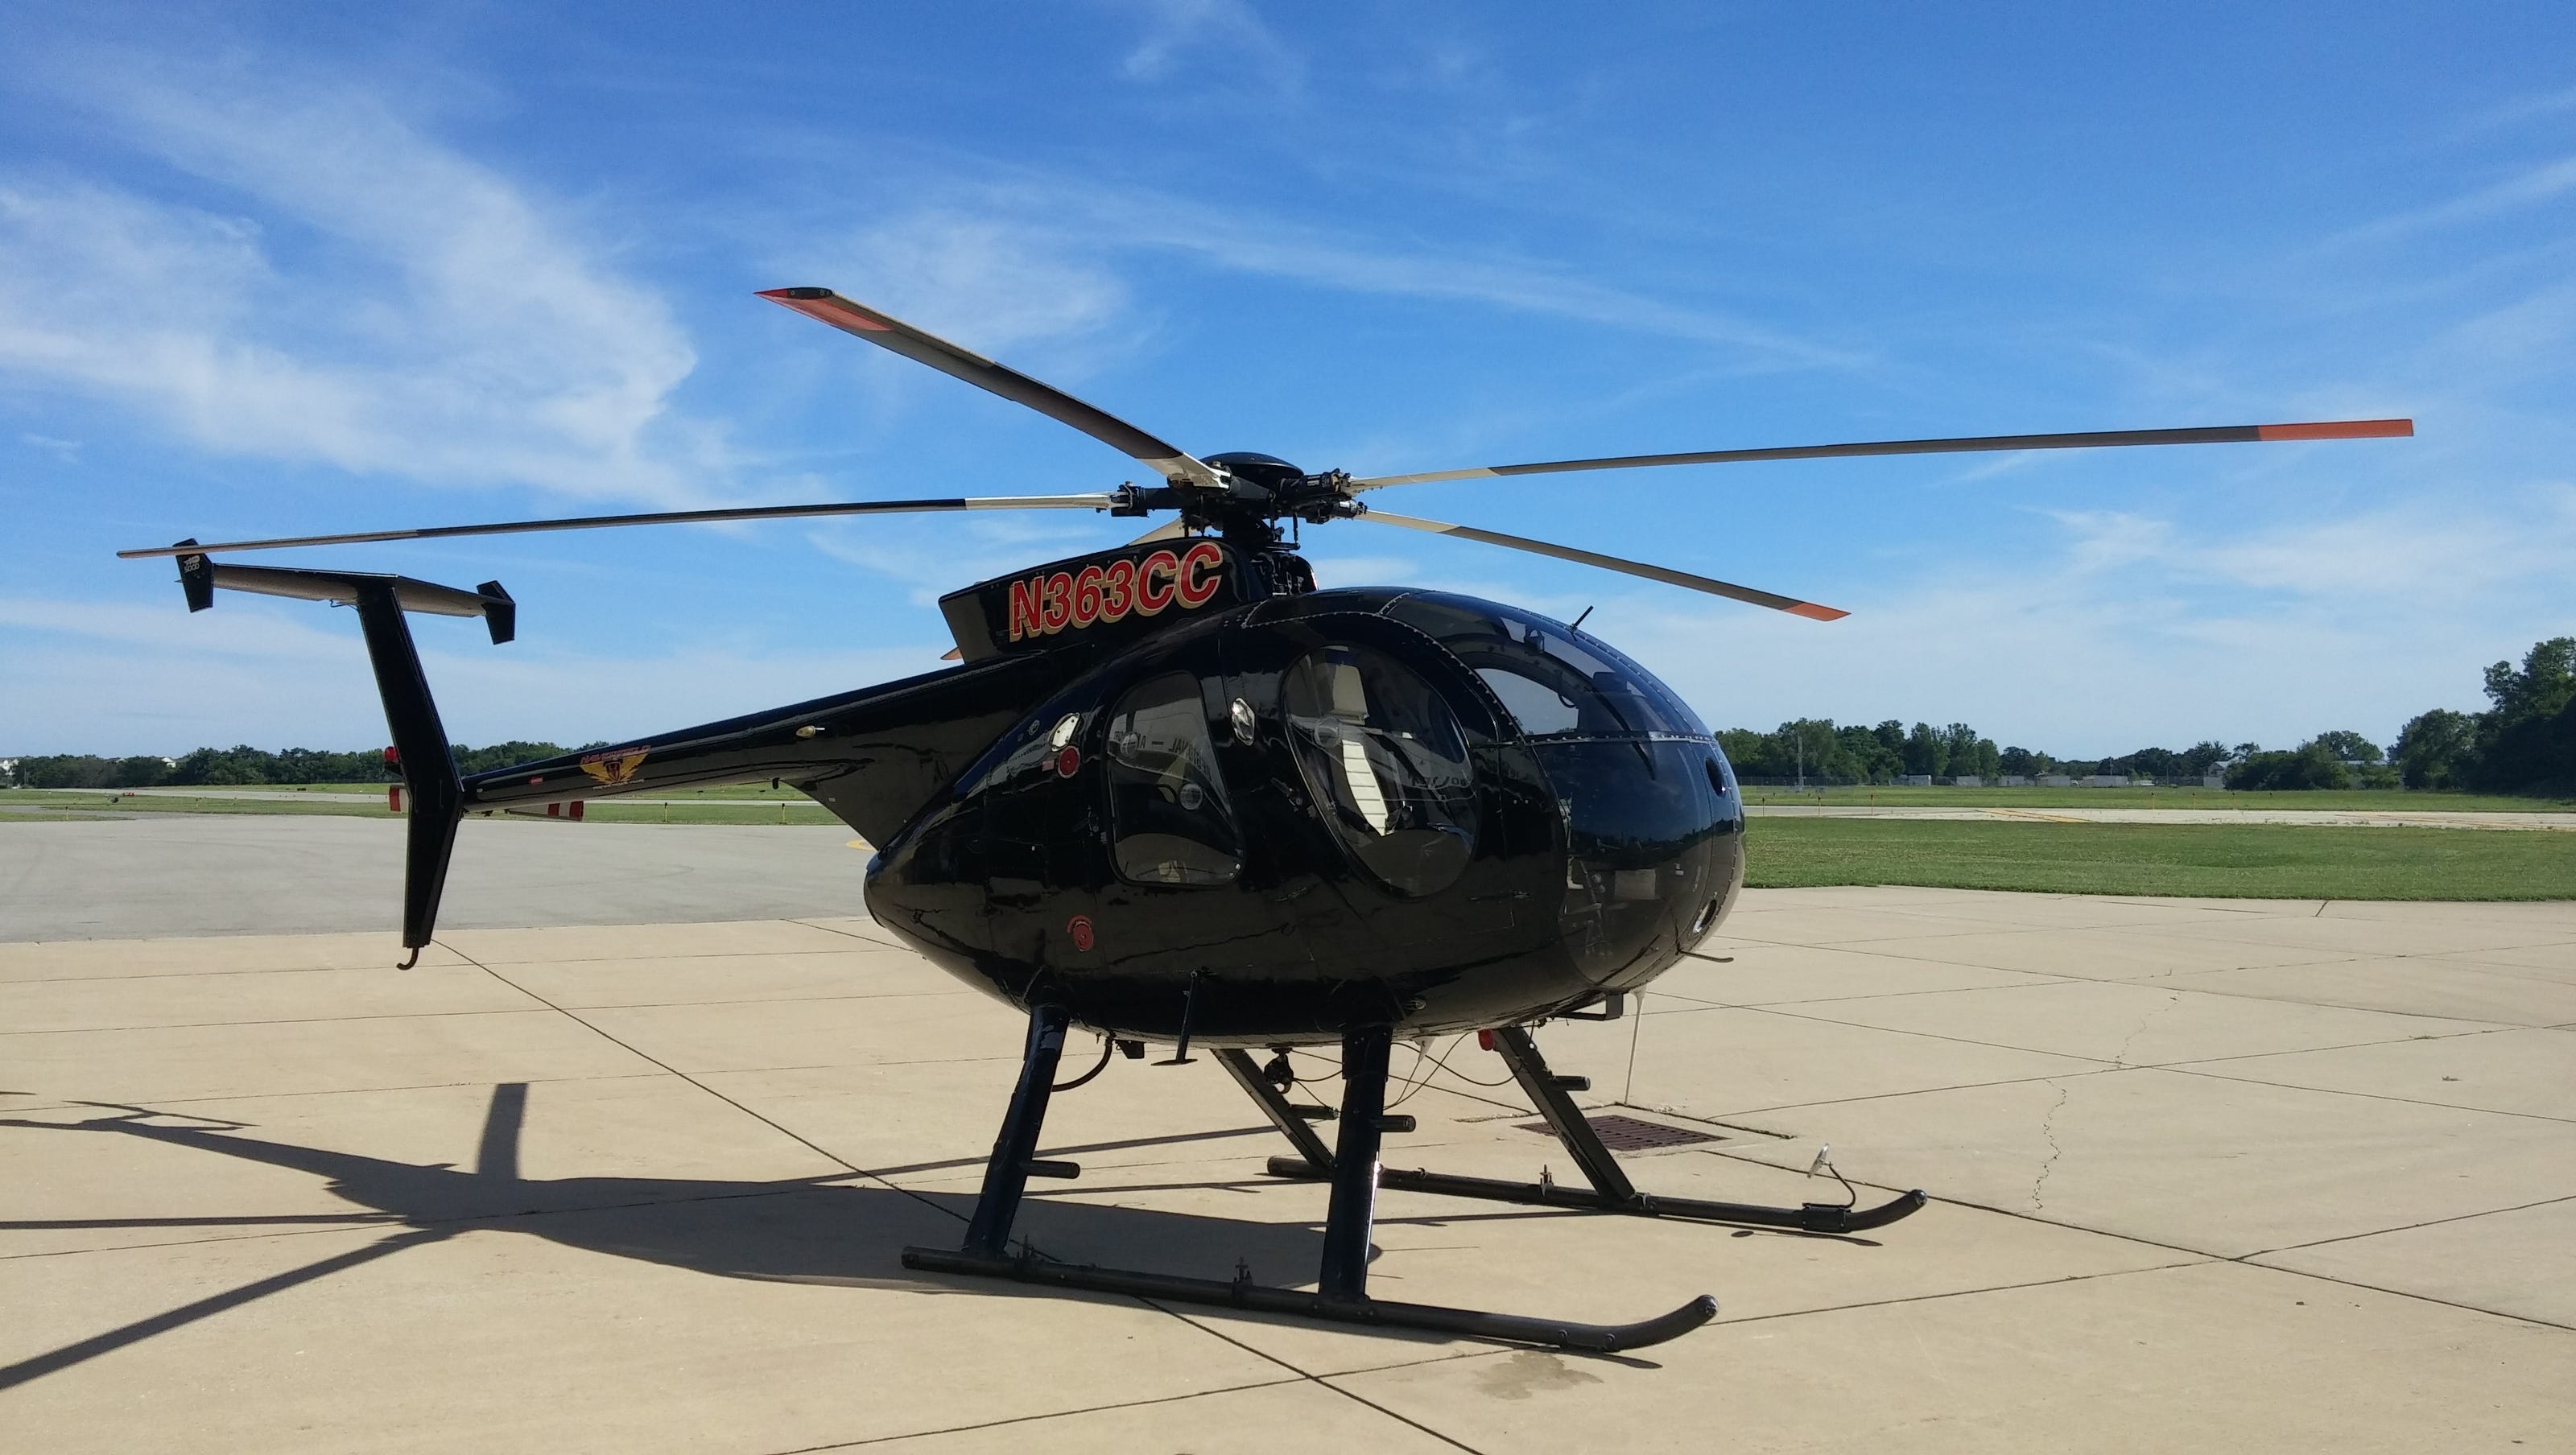 Why will a black helicopter be hovering over parts of central PA?